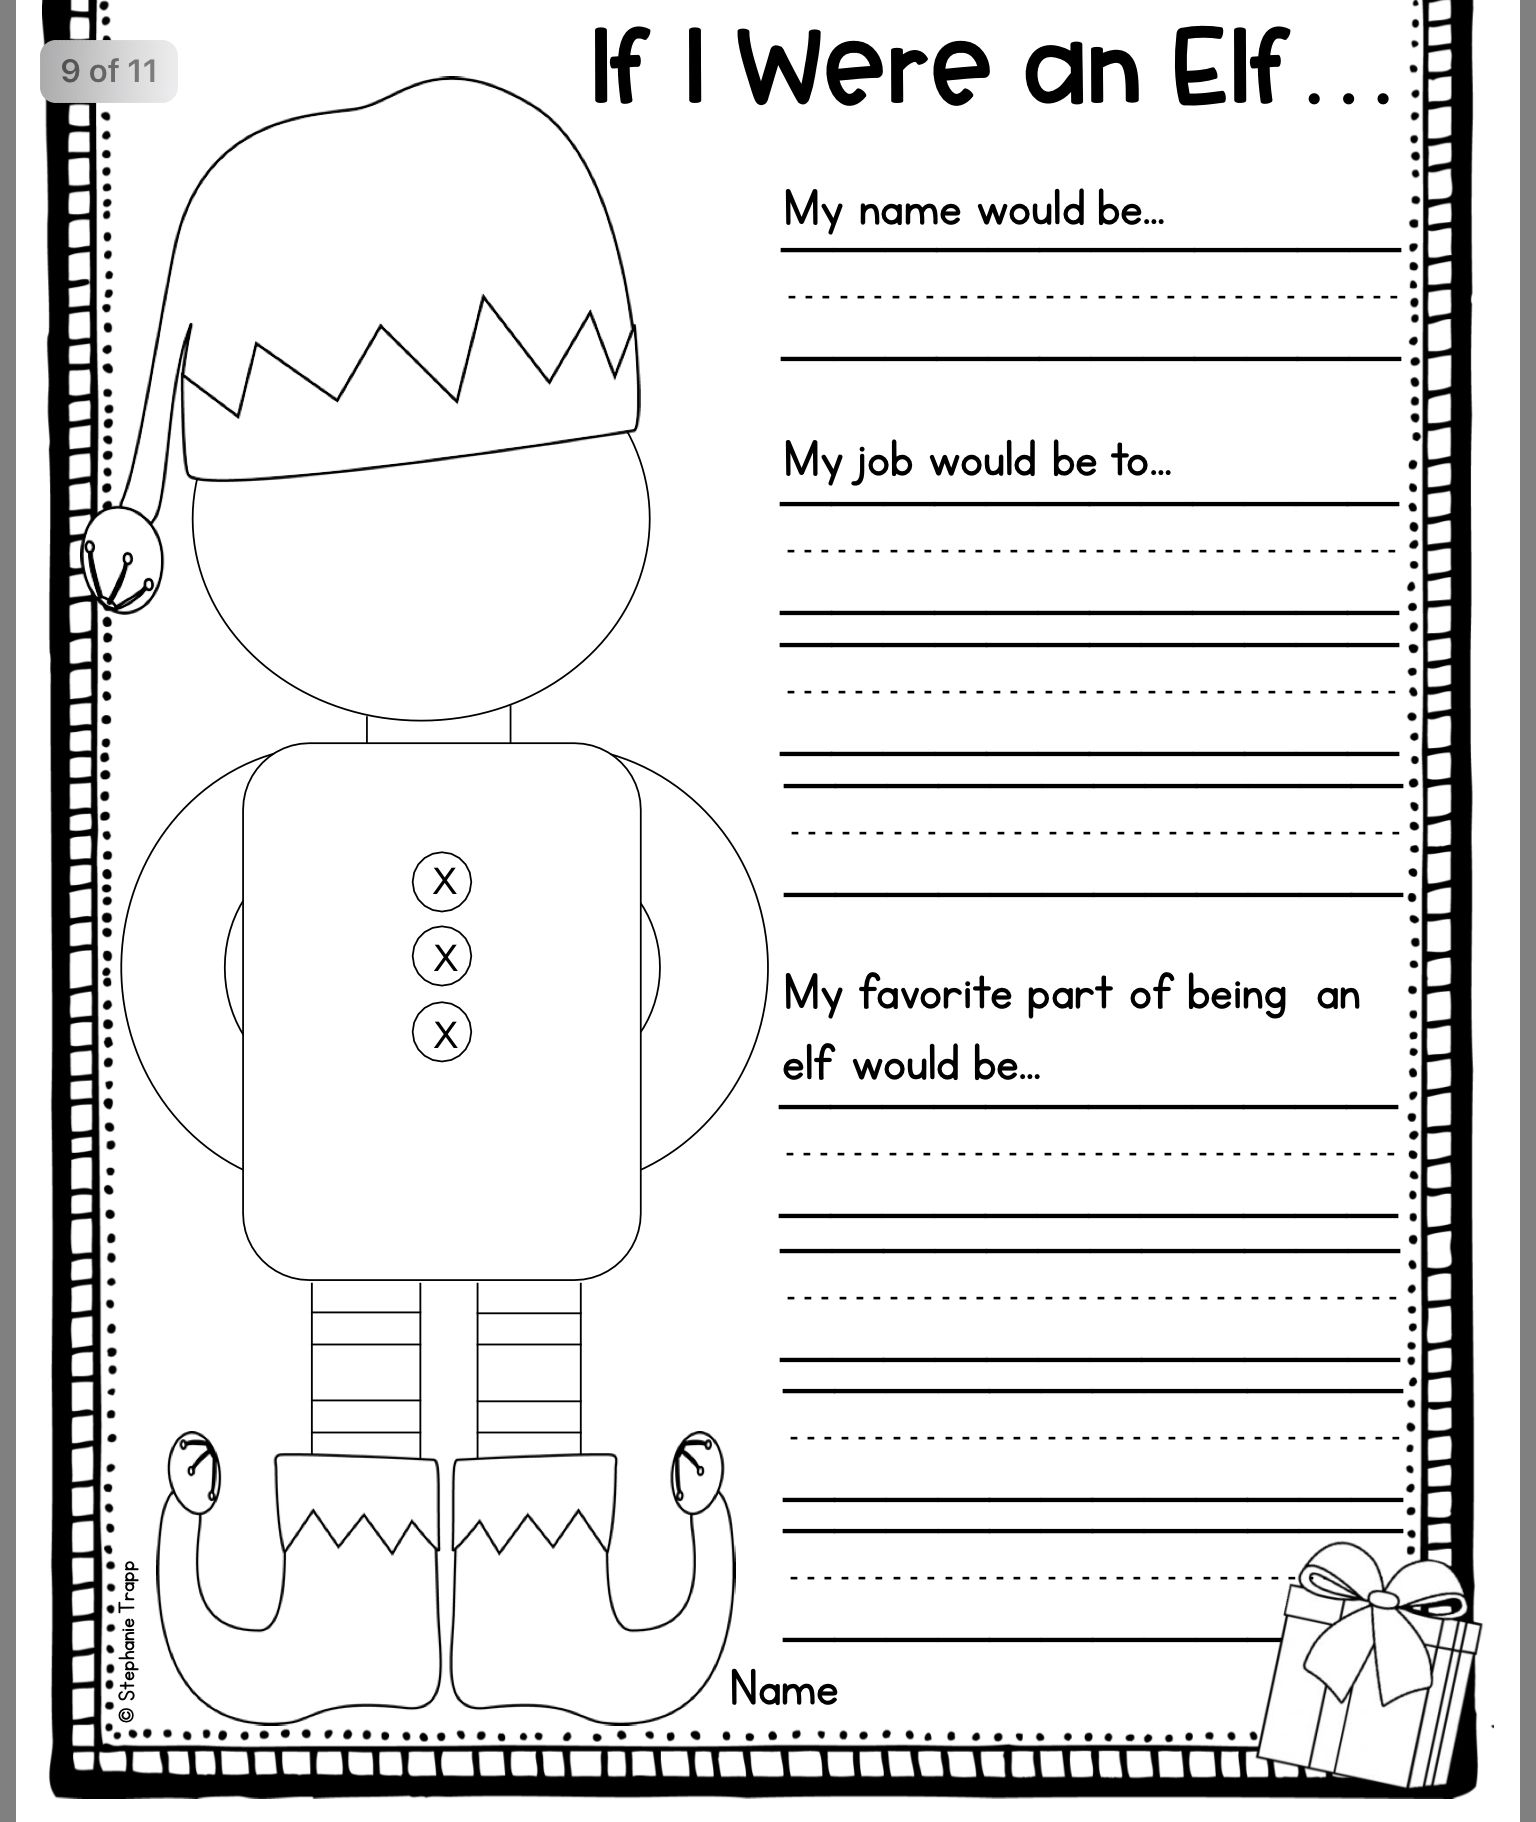 snowglobe-christmas-activity-sheets-for-kids-free-printables